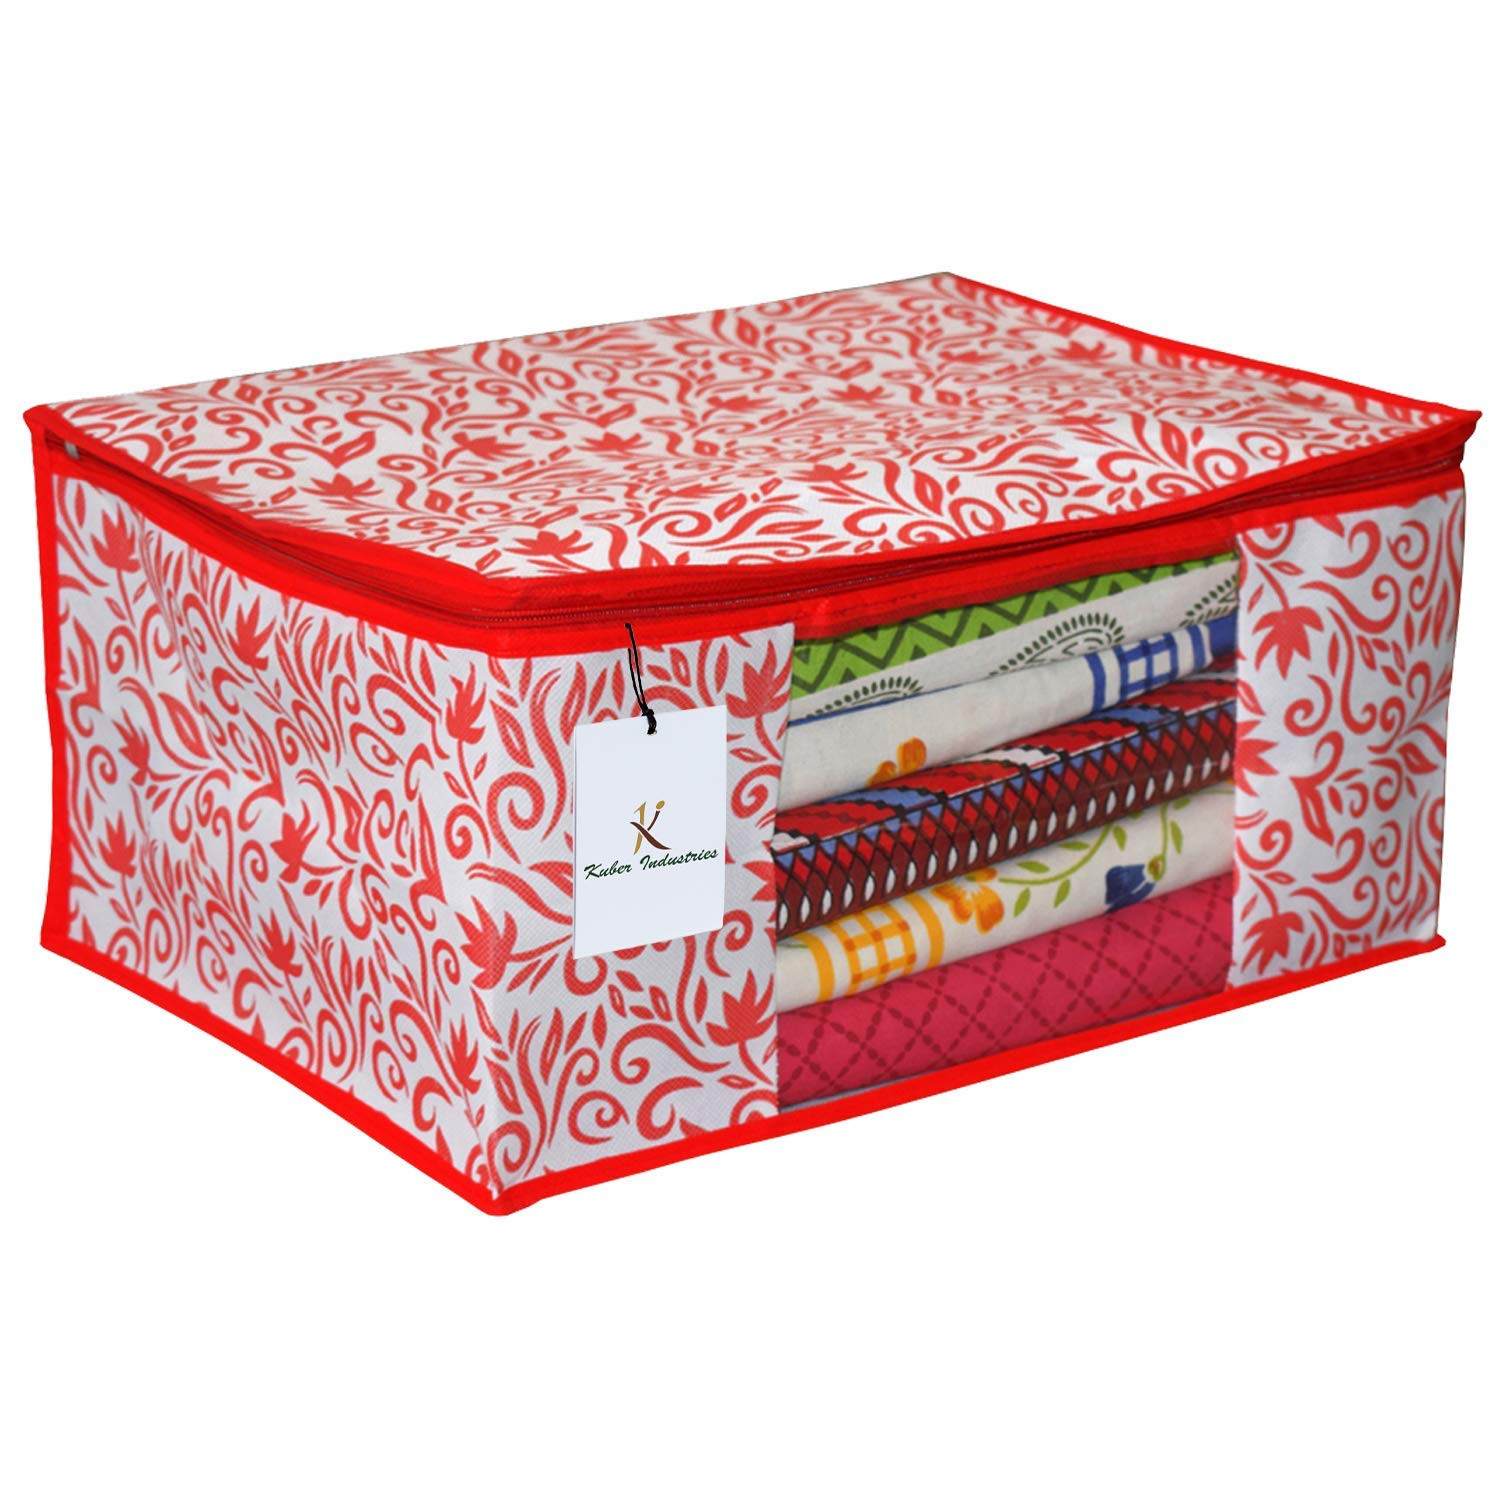 Kuber Industries Leaf Design Non Woven Saree Cover/Cloth Wardrobe Organizer And Blouse Cover Combo Set (Red) -CTKTC38403